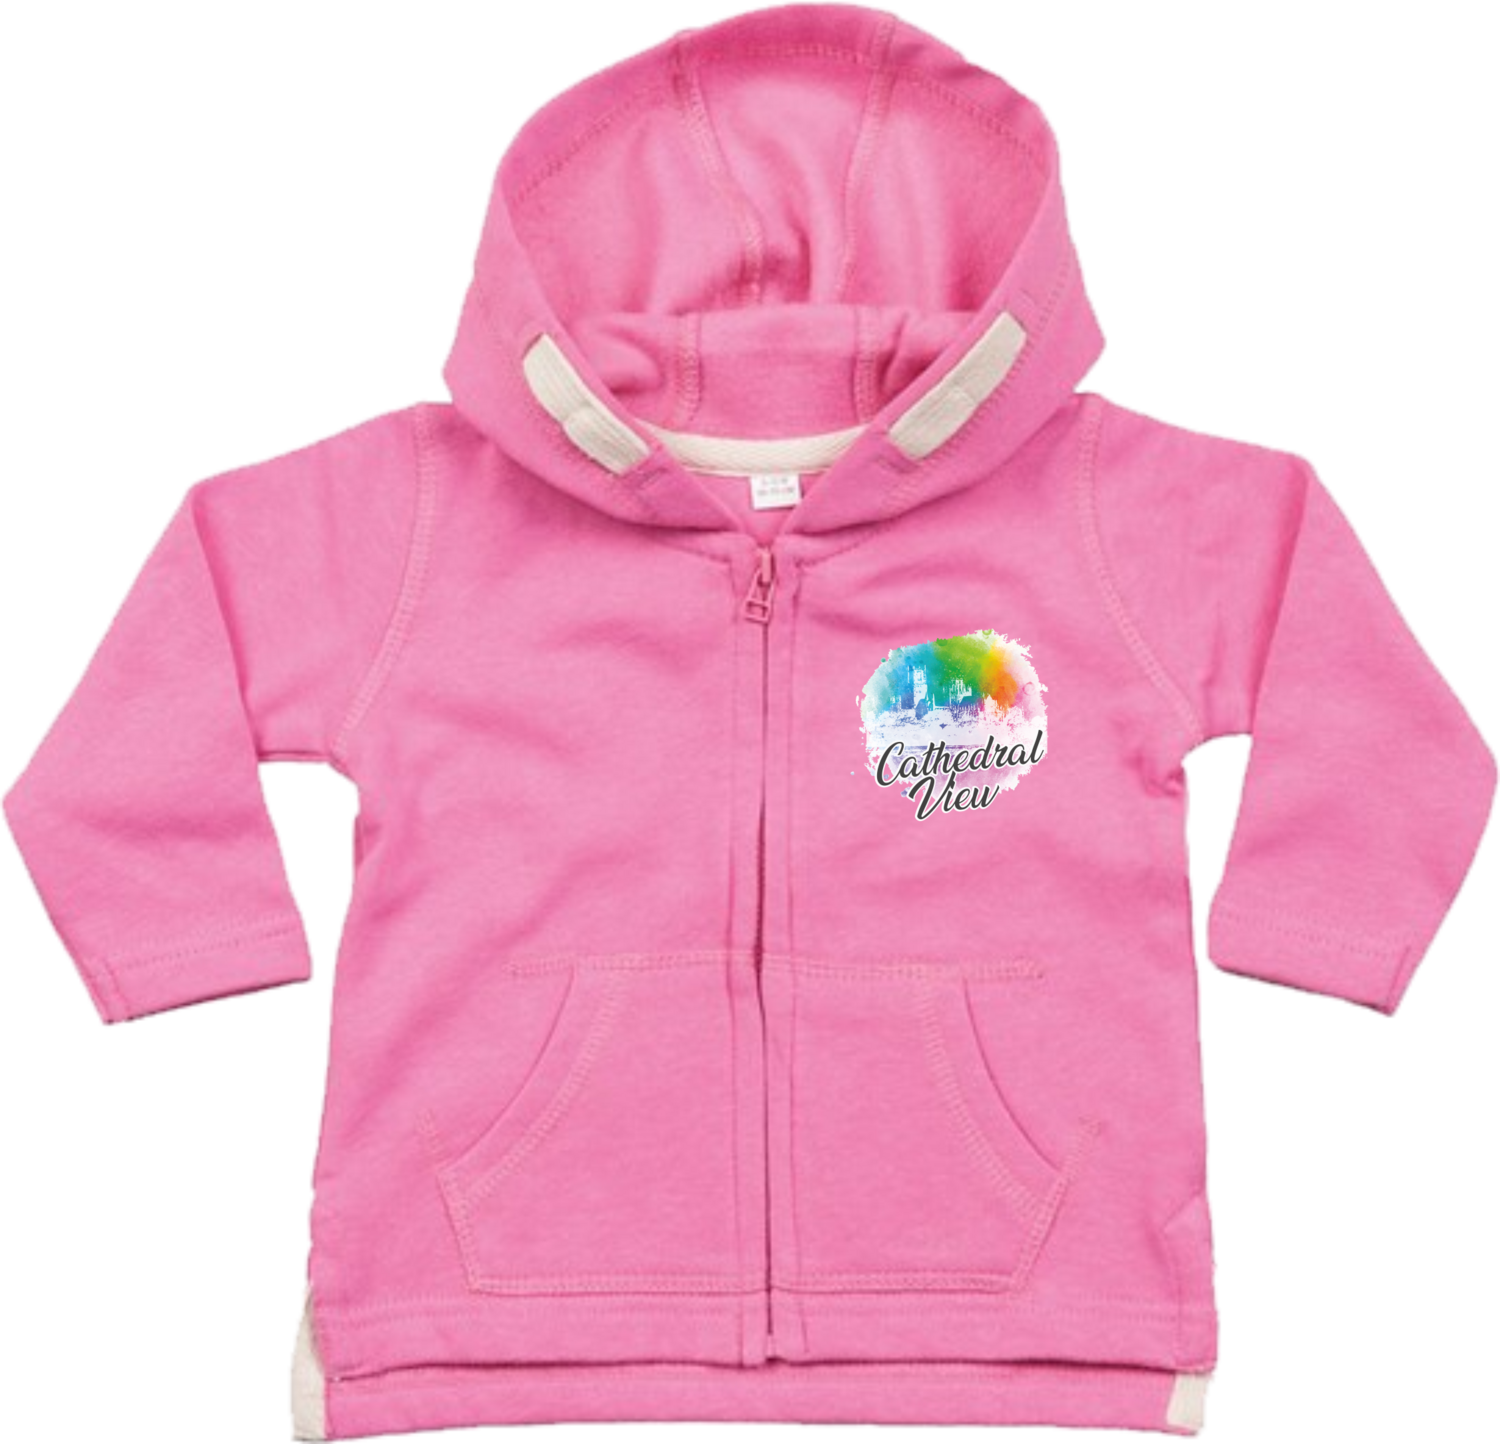 Cathedral View Zipped Baby Hoodie